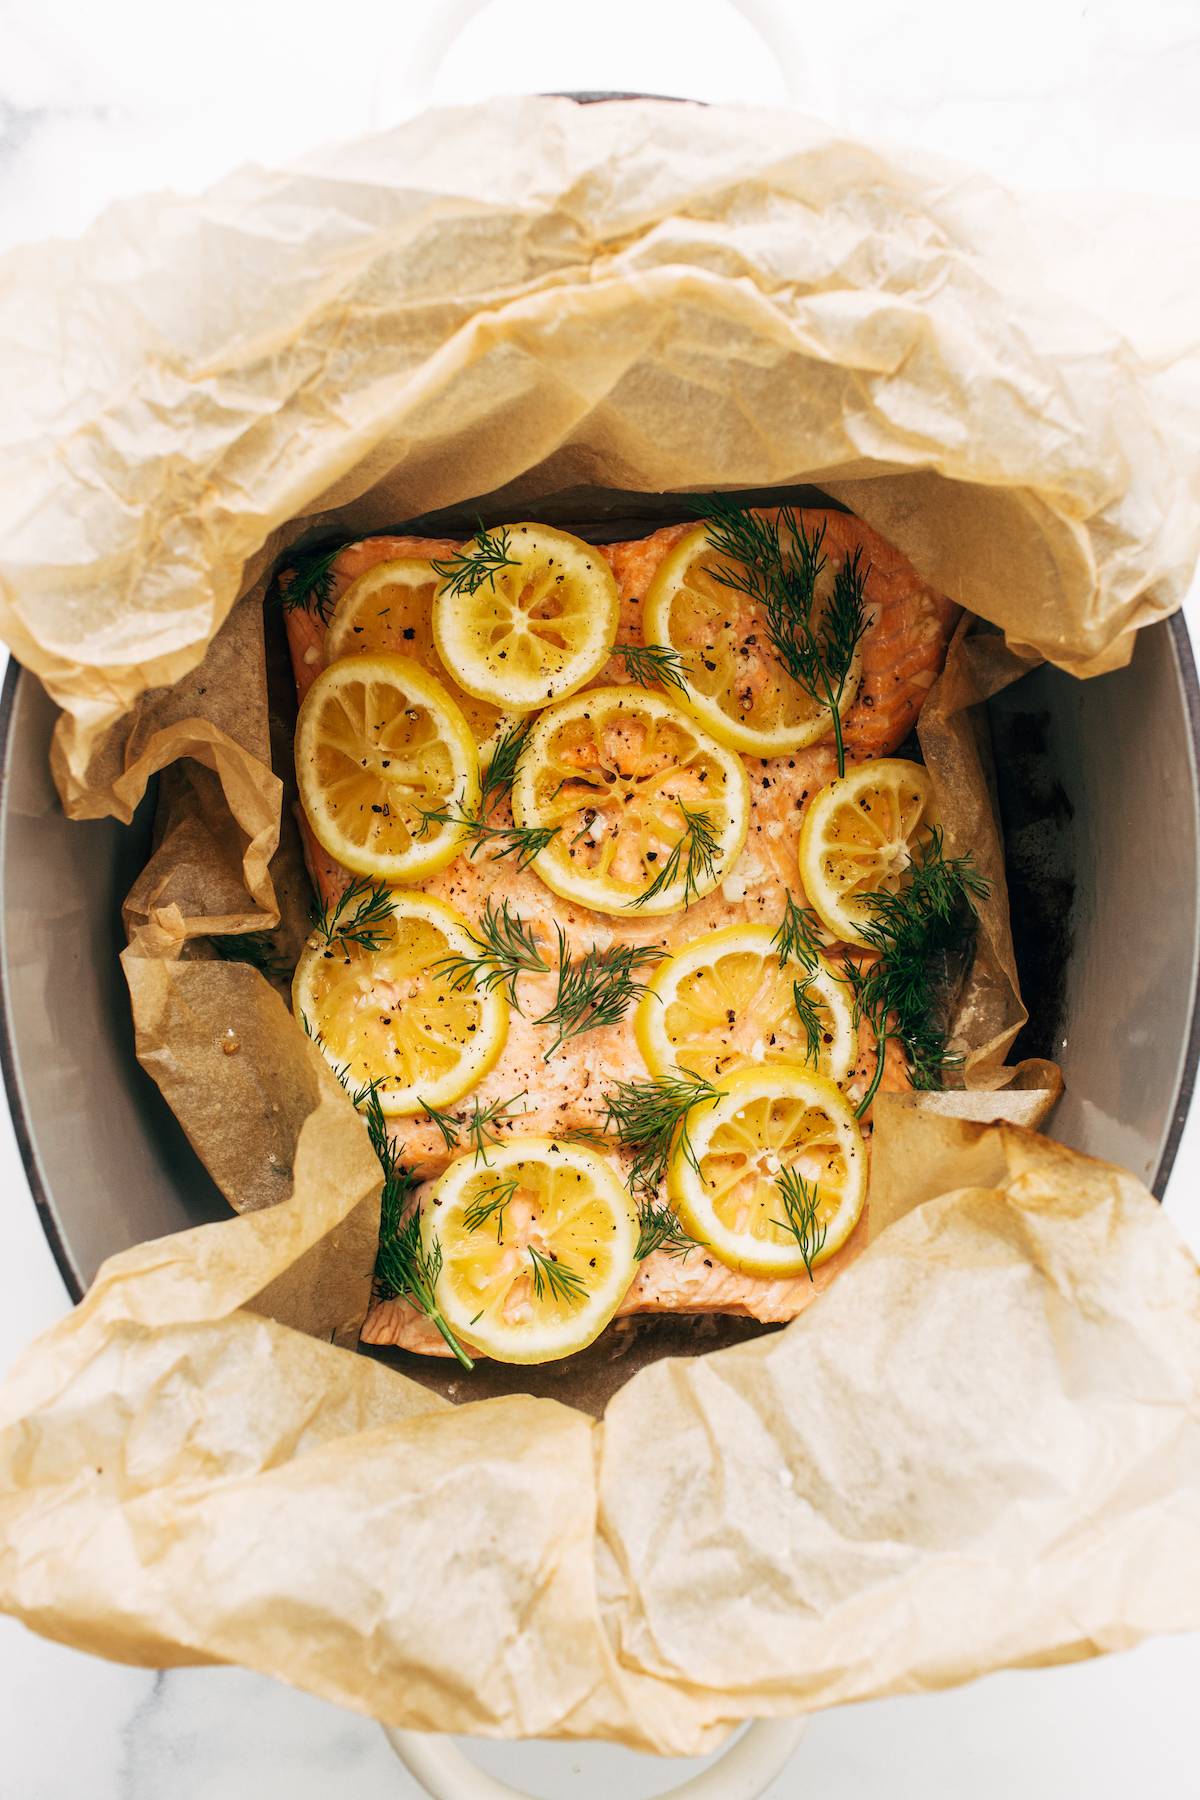 Four fillets of salmon in a dutch oven with lemon slices and dill.